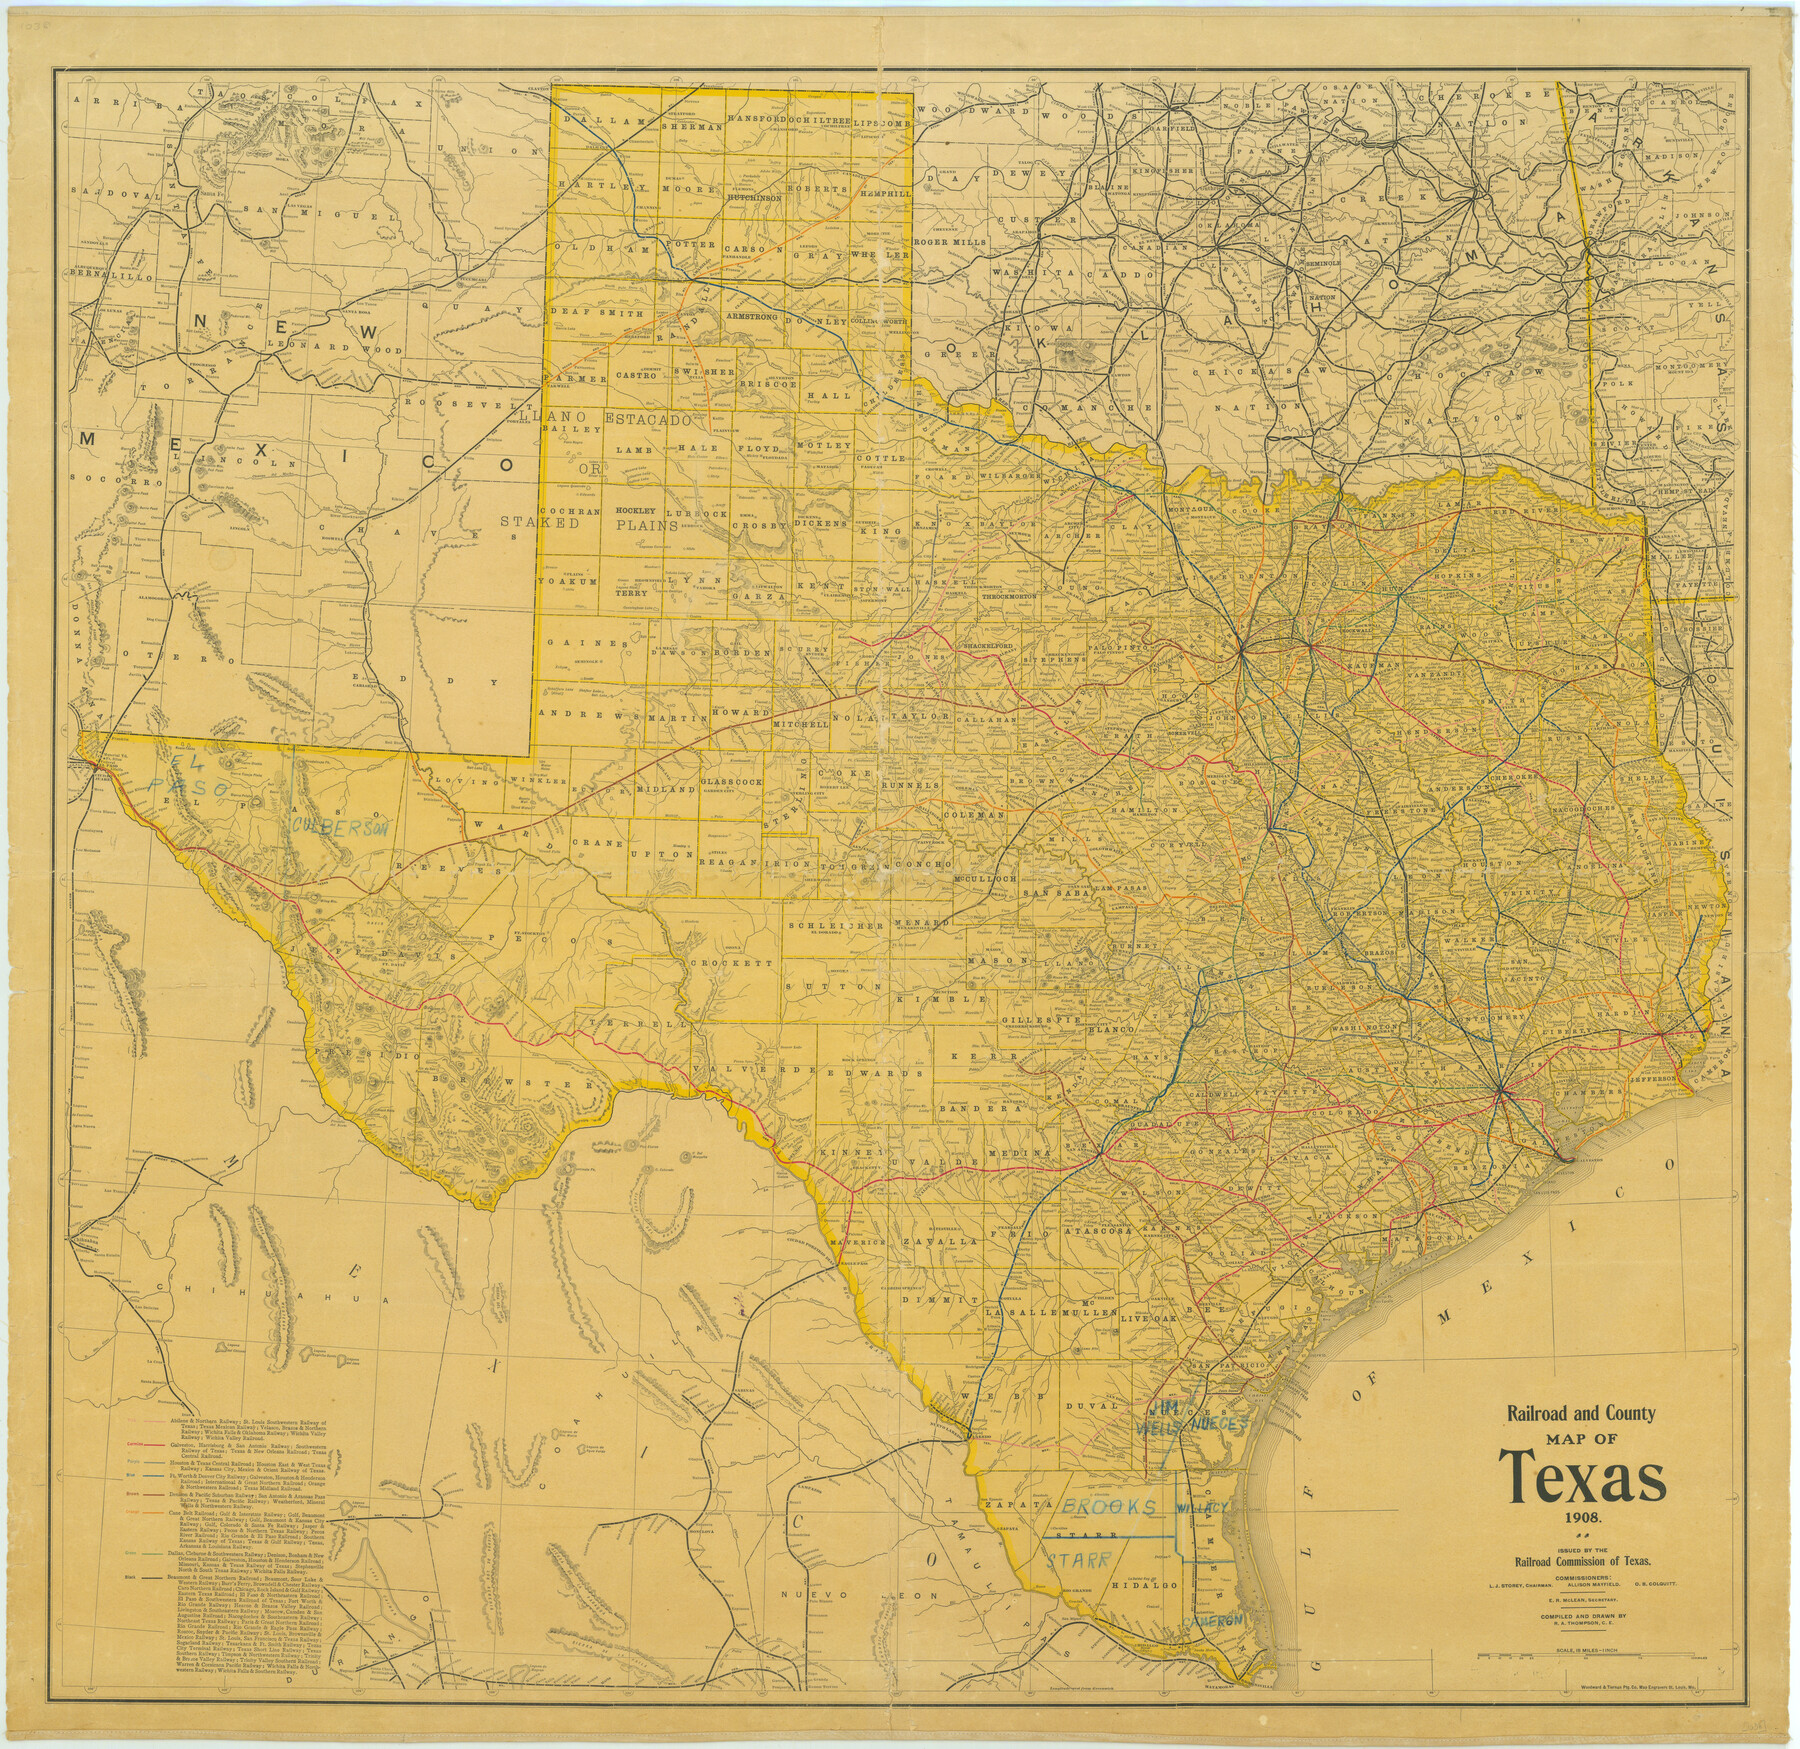 76225, Railroad and County Map of Texas, Texas State Library and Archives